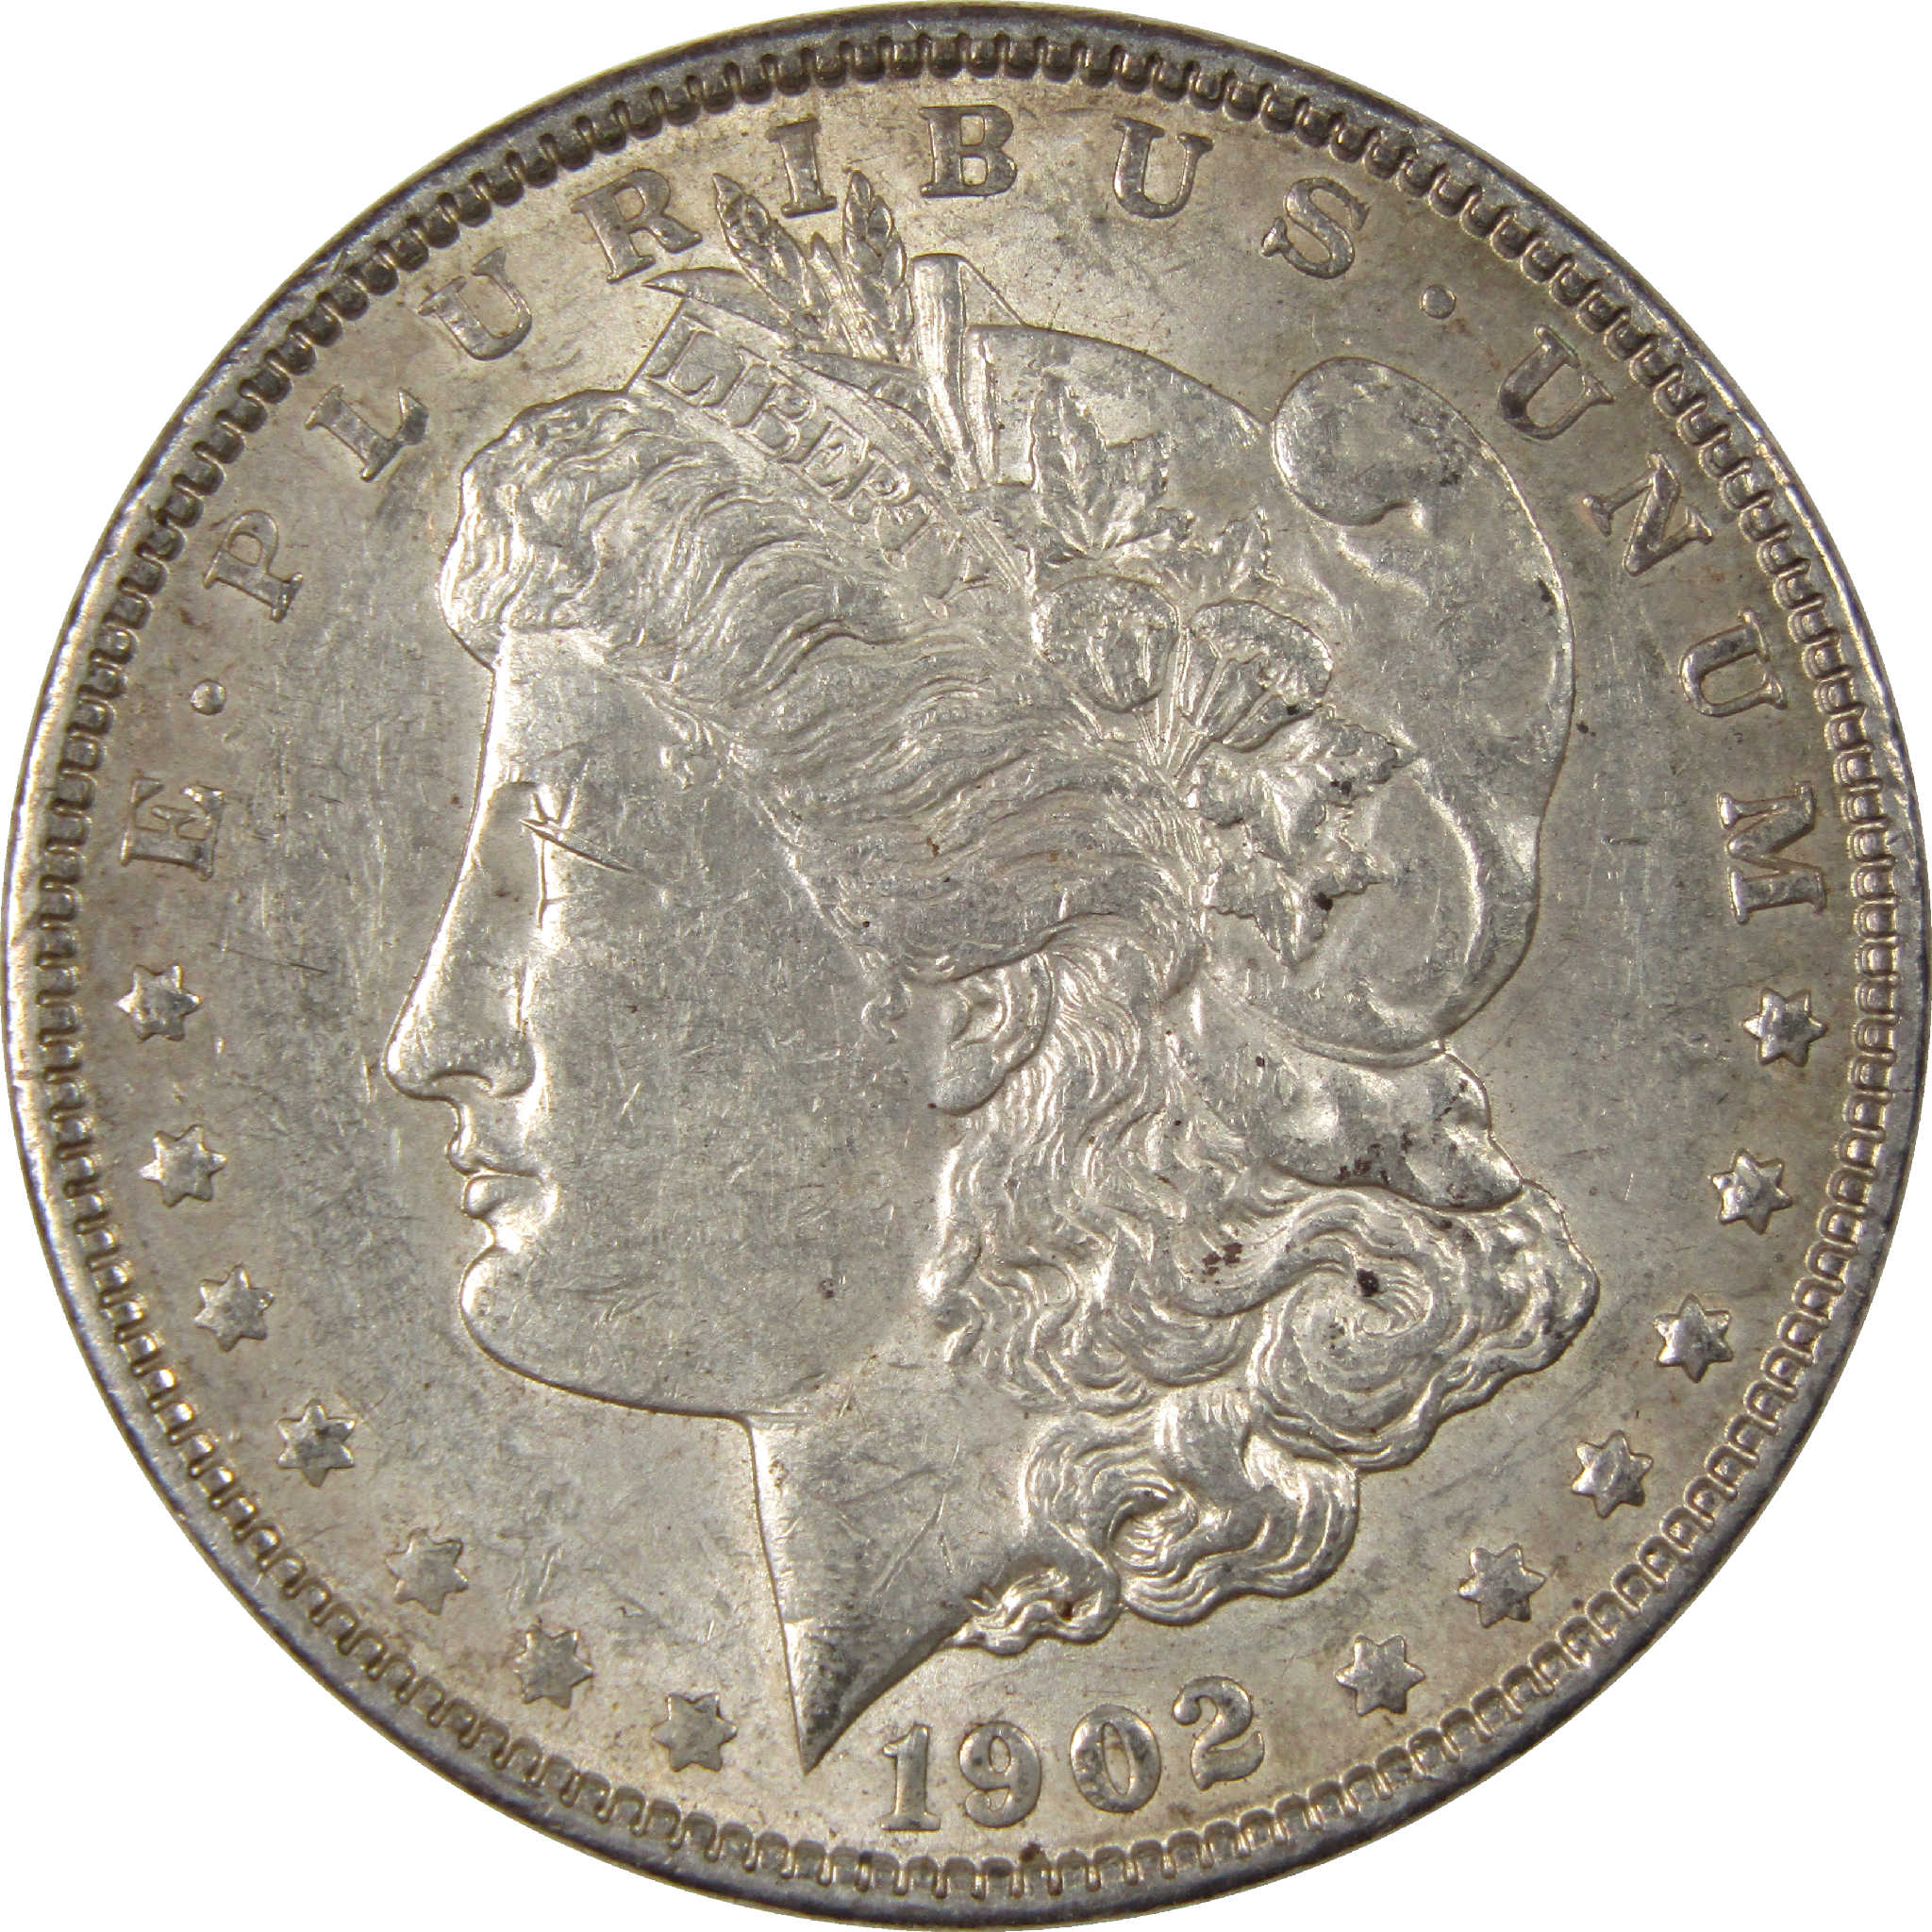 1902 Morgan Dollar AU About Uncirculated Silver $1 Coin SKU:I11622 - Morgan coin - Morgan silver dollar - Morgan silver dollar for sale - Profile Coins &amp; Collectibles